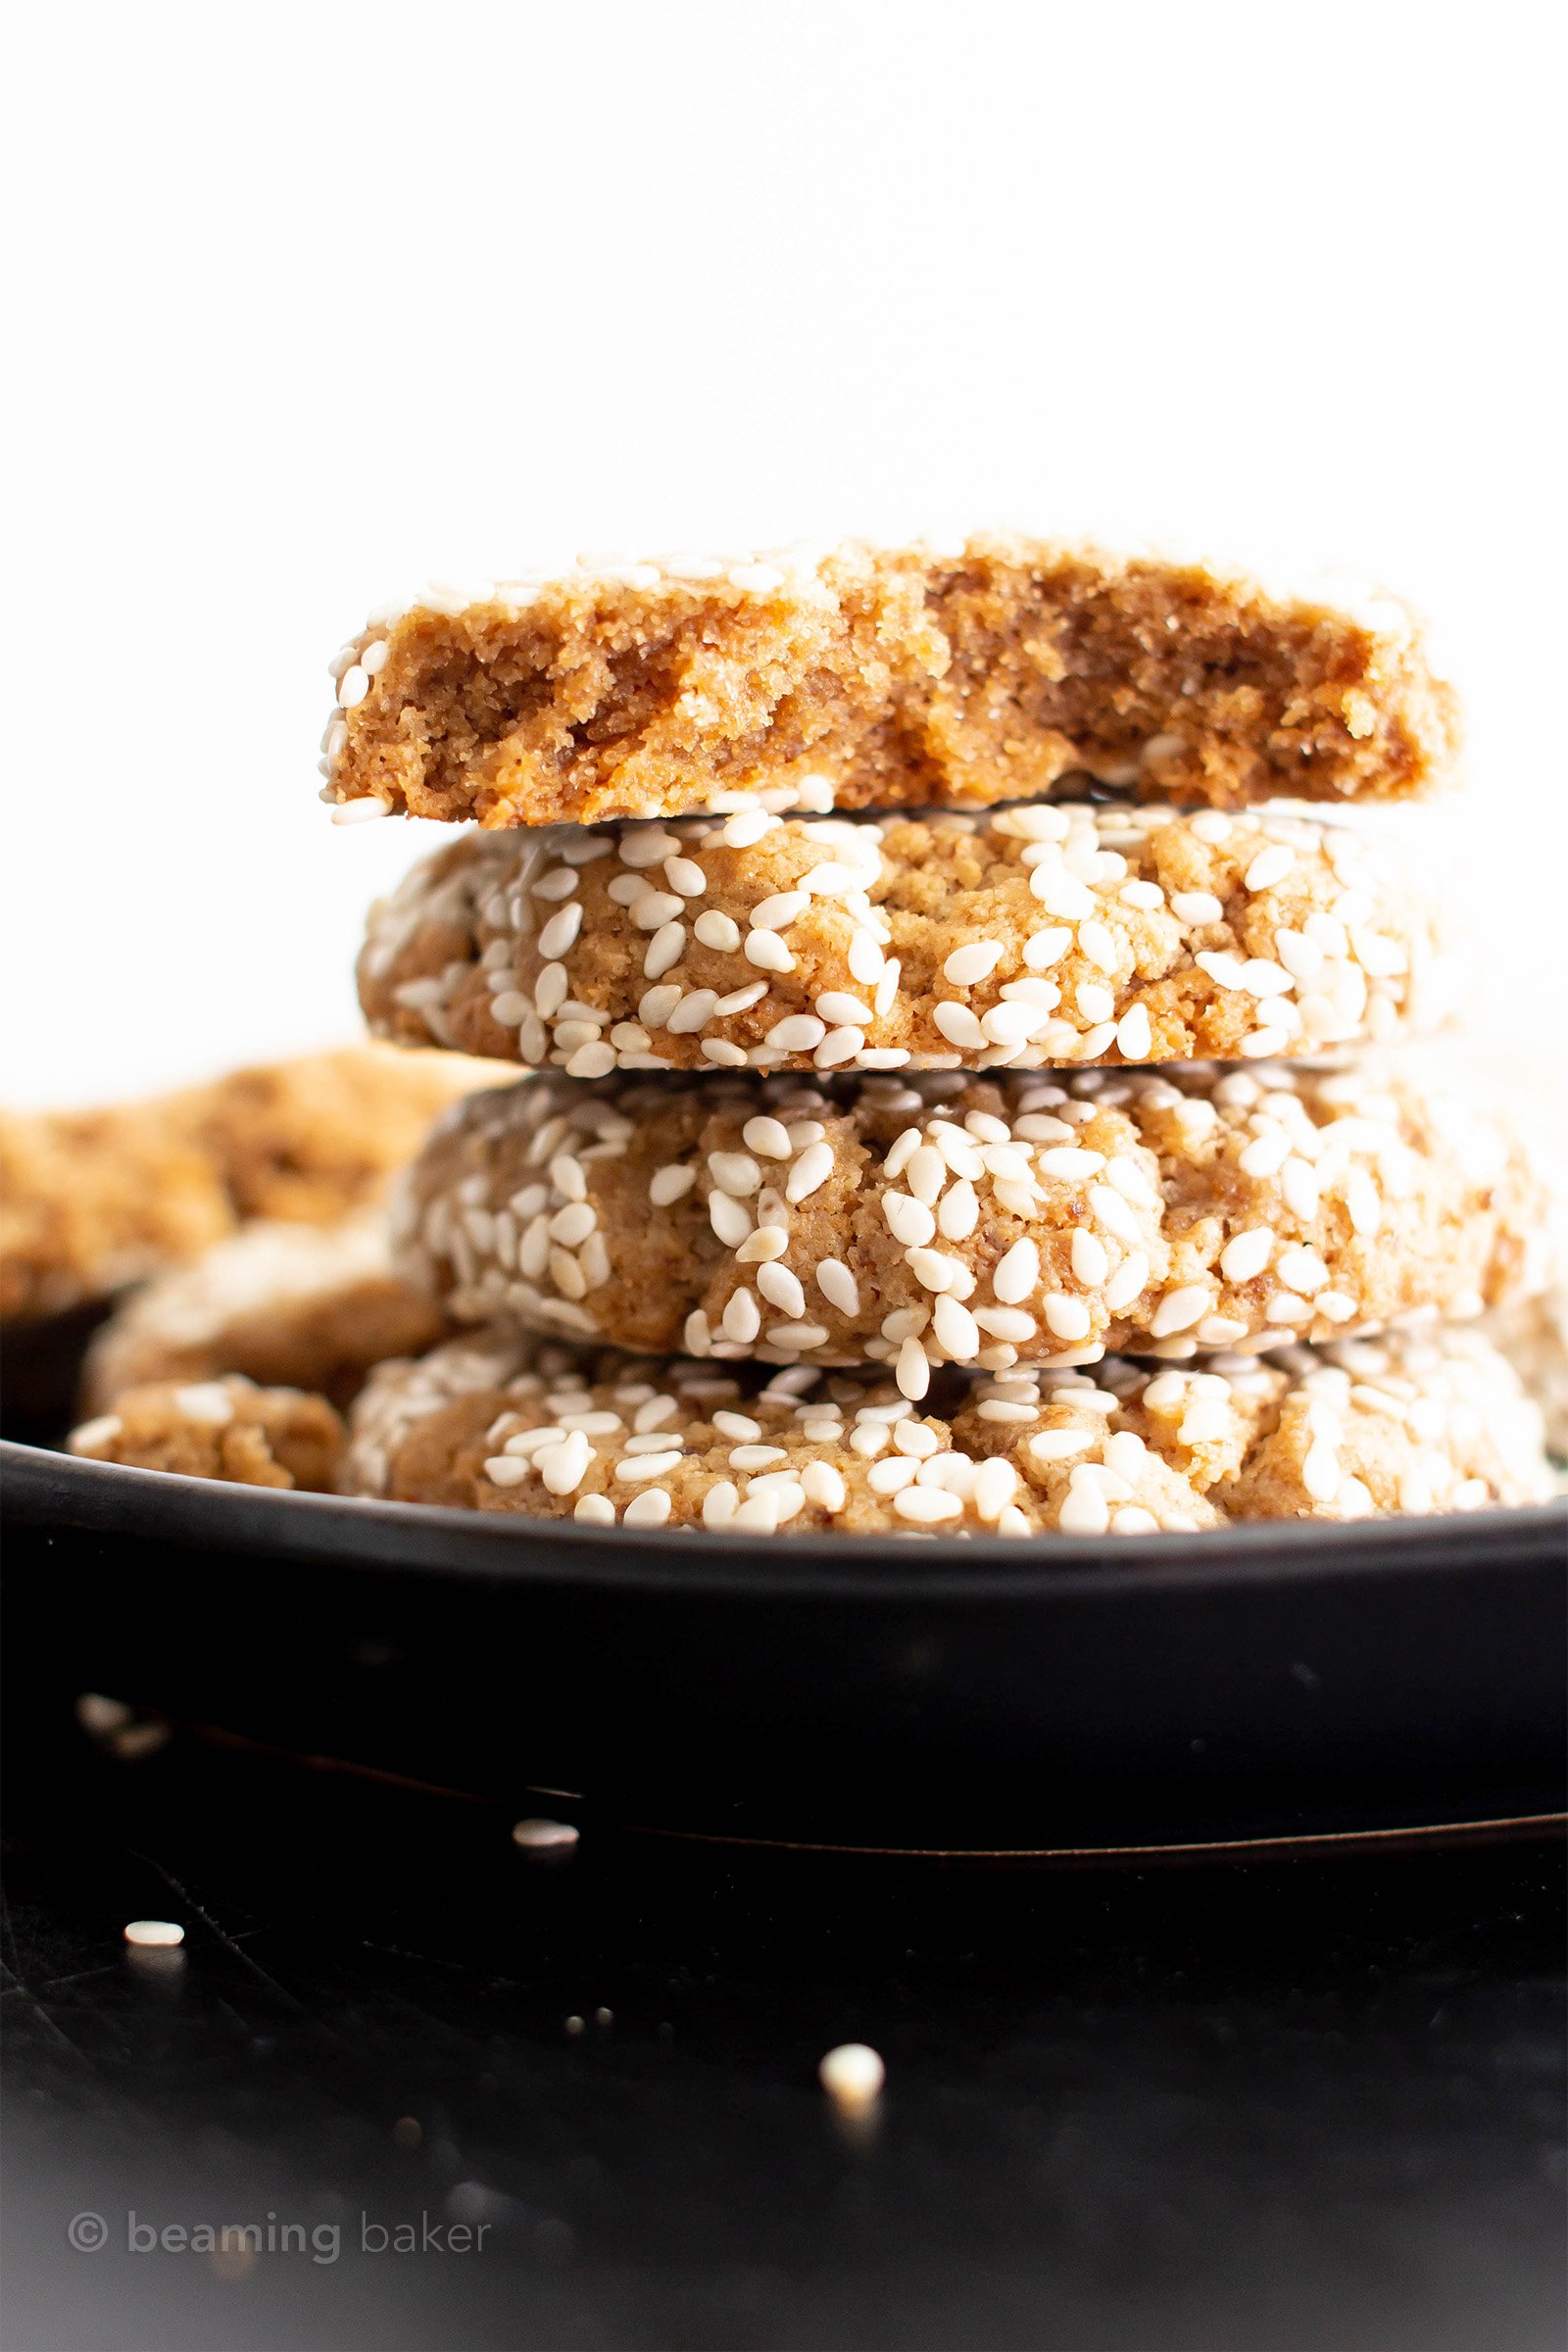 25+ Healthy Breakfast Cookies and Bars Recipes + More (Vegan, Gluten-Free): this collection of healthy breakfast cookies and bars recipes includes homemade breakfast bars, easy breakfast cookies, dairy-free vegan muffins and more! #Vegan #GlutenFree #Healthy #Breakfast #Snacks #DairyFree | Recipes at BeamingBaker.com